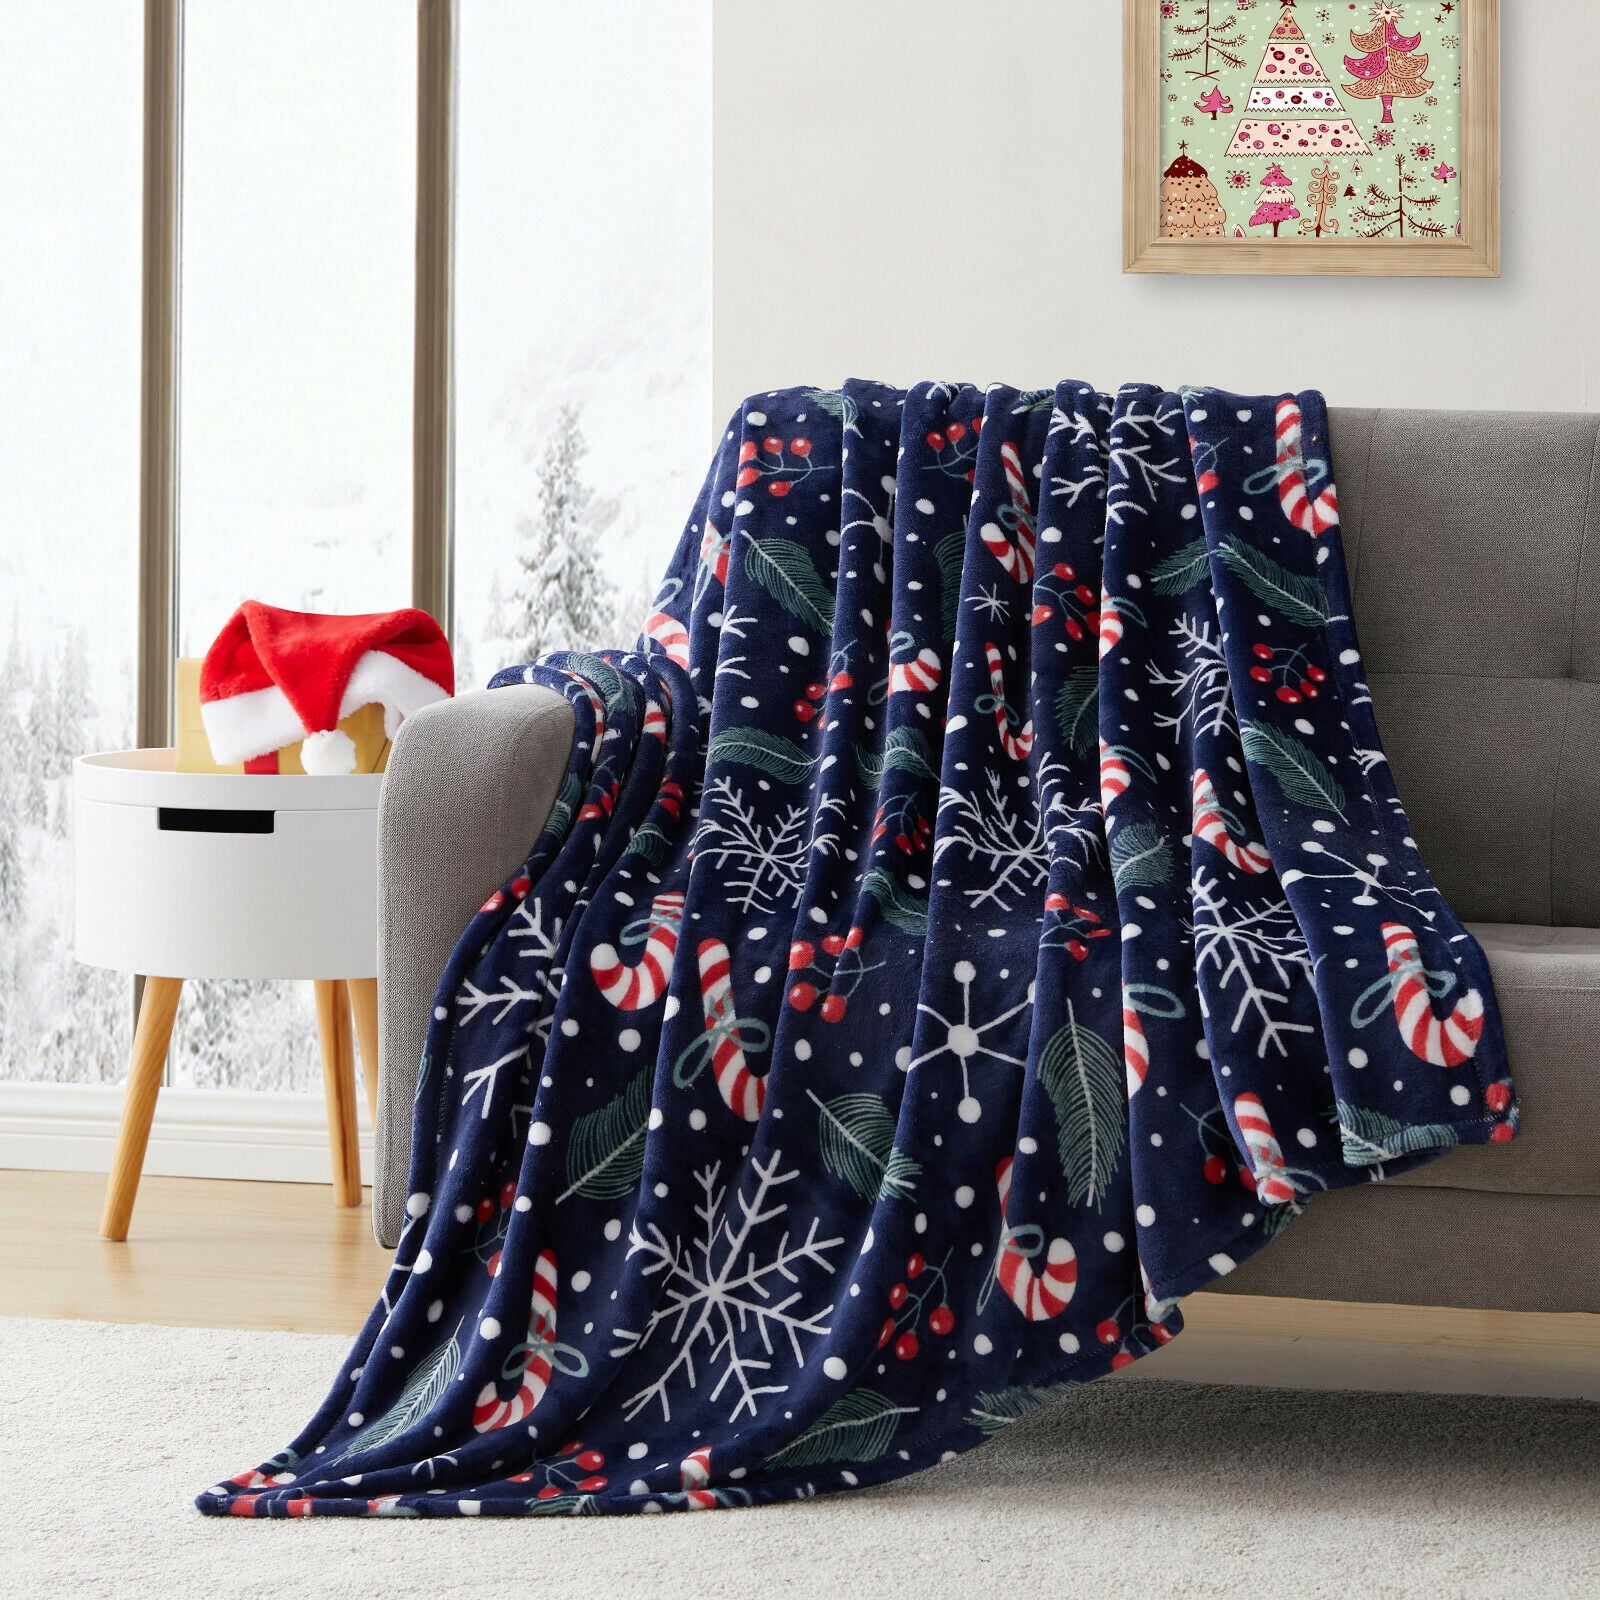 Cozy Plush for Indoor and Outdoor Use Lunarable Candy Cane Soft Flannel Fleece Throw Blanket Cane Hearts on Blue Christmas Winter Elements Sweets and Sugar 50 x 70 Vermilion Pale Blue